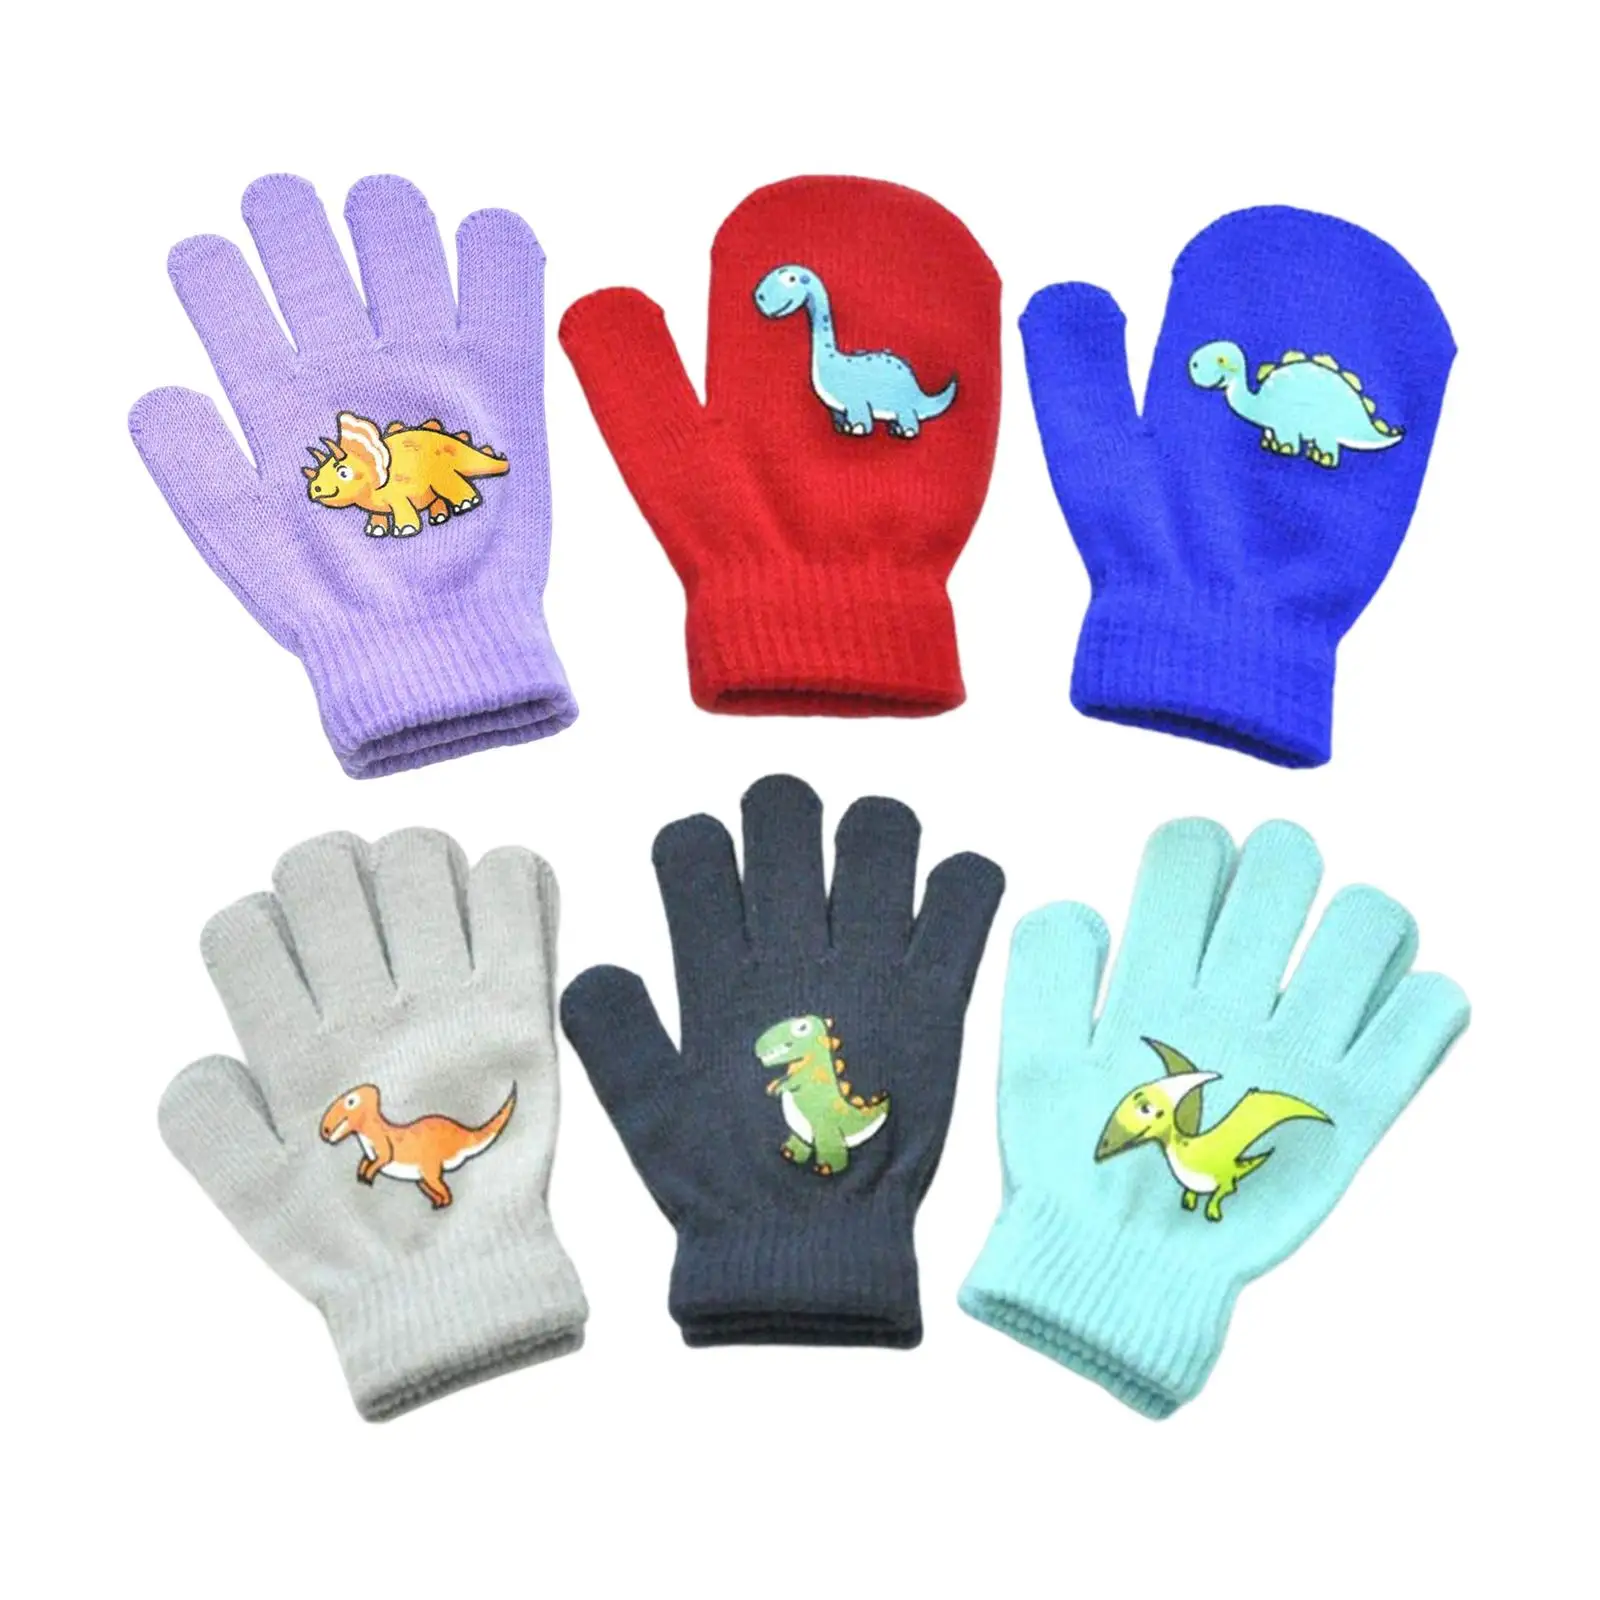 12x Stretchy Warm Knitted Gloves Playing Skating Skiing Kids Gloves Winter